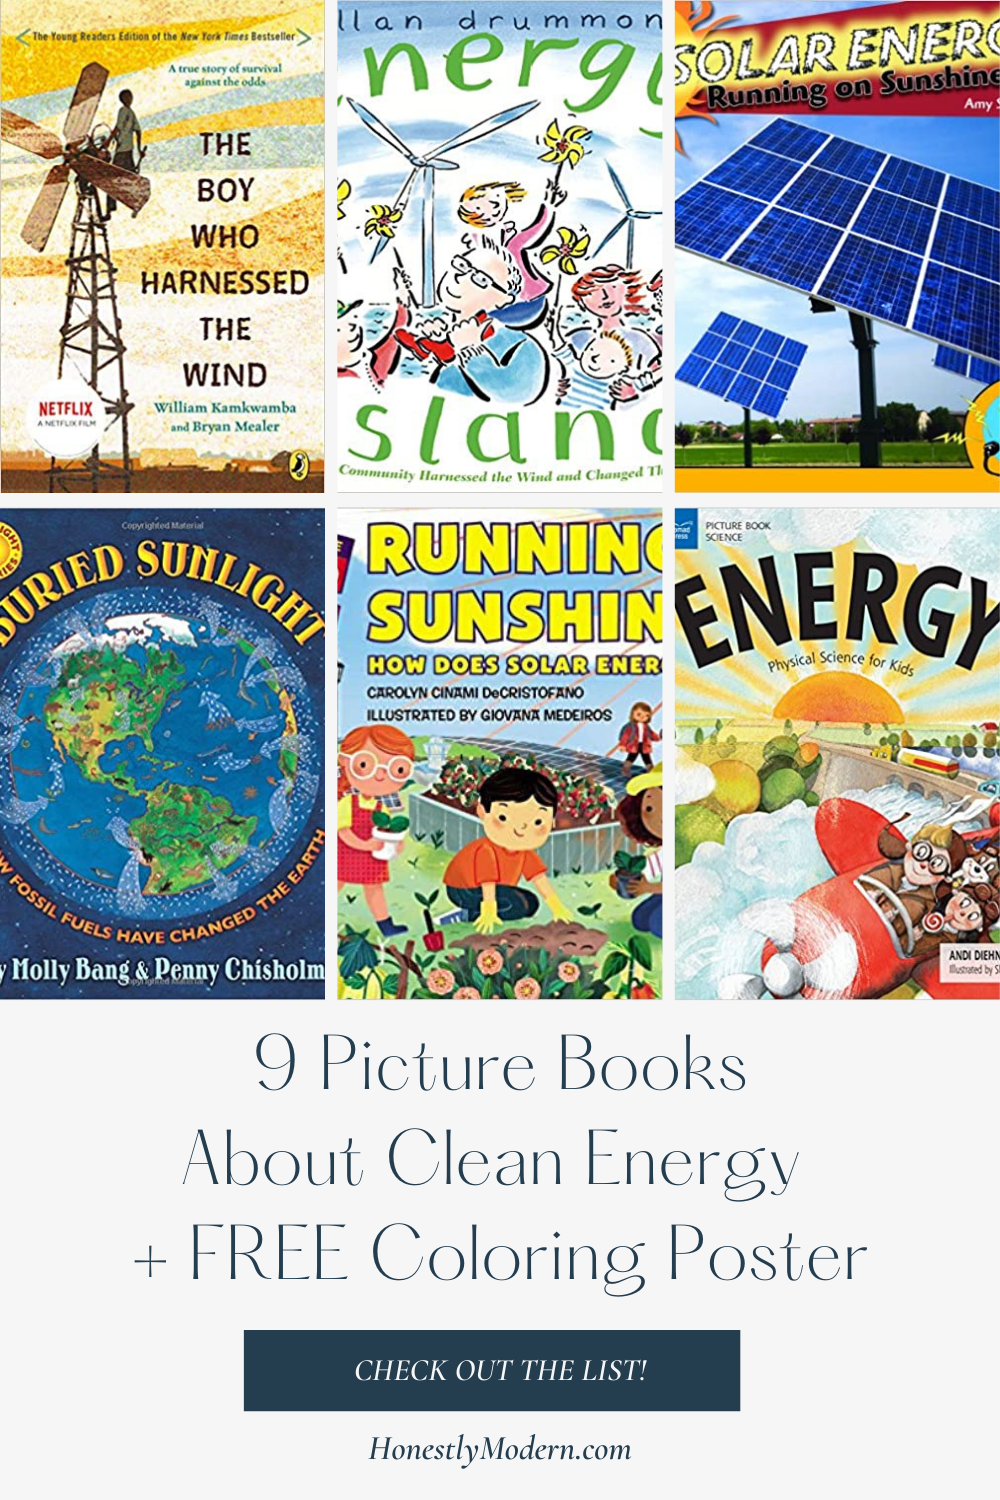 Affordable & Clean Energy | Picture Book List For United Nations Sustainable Development Goal #7